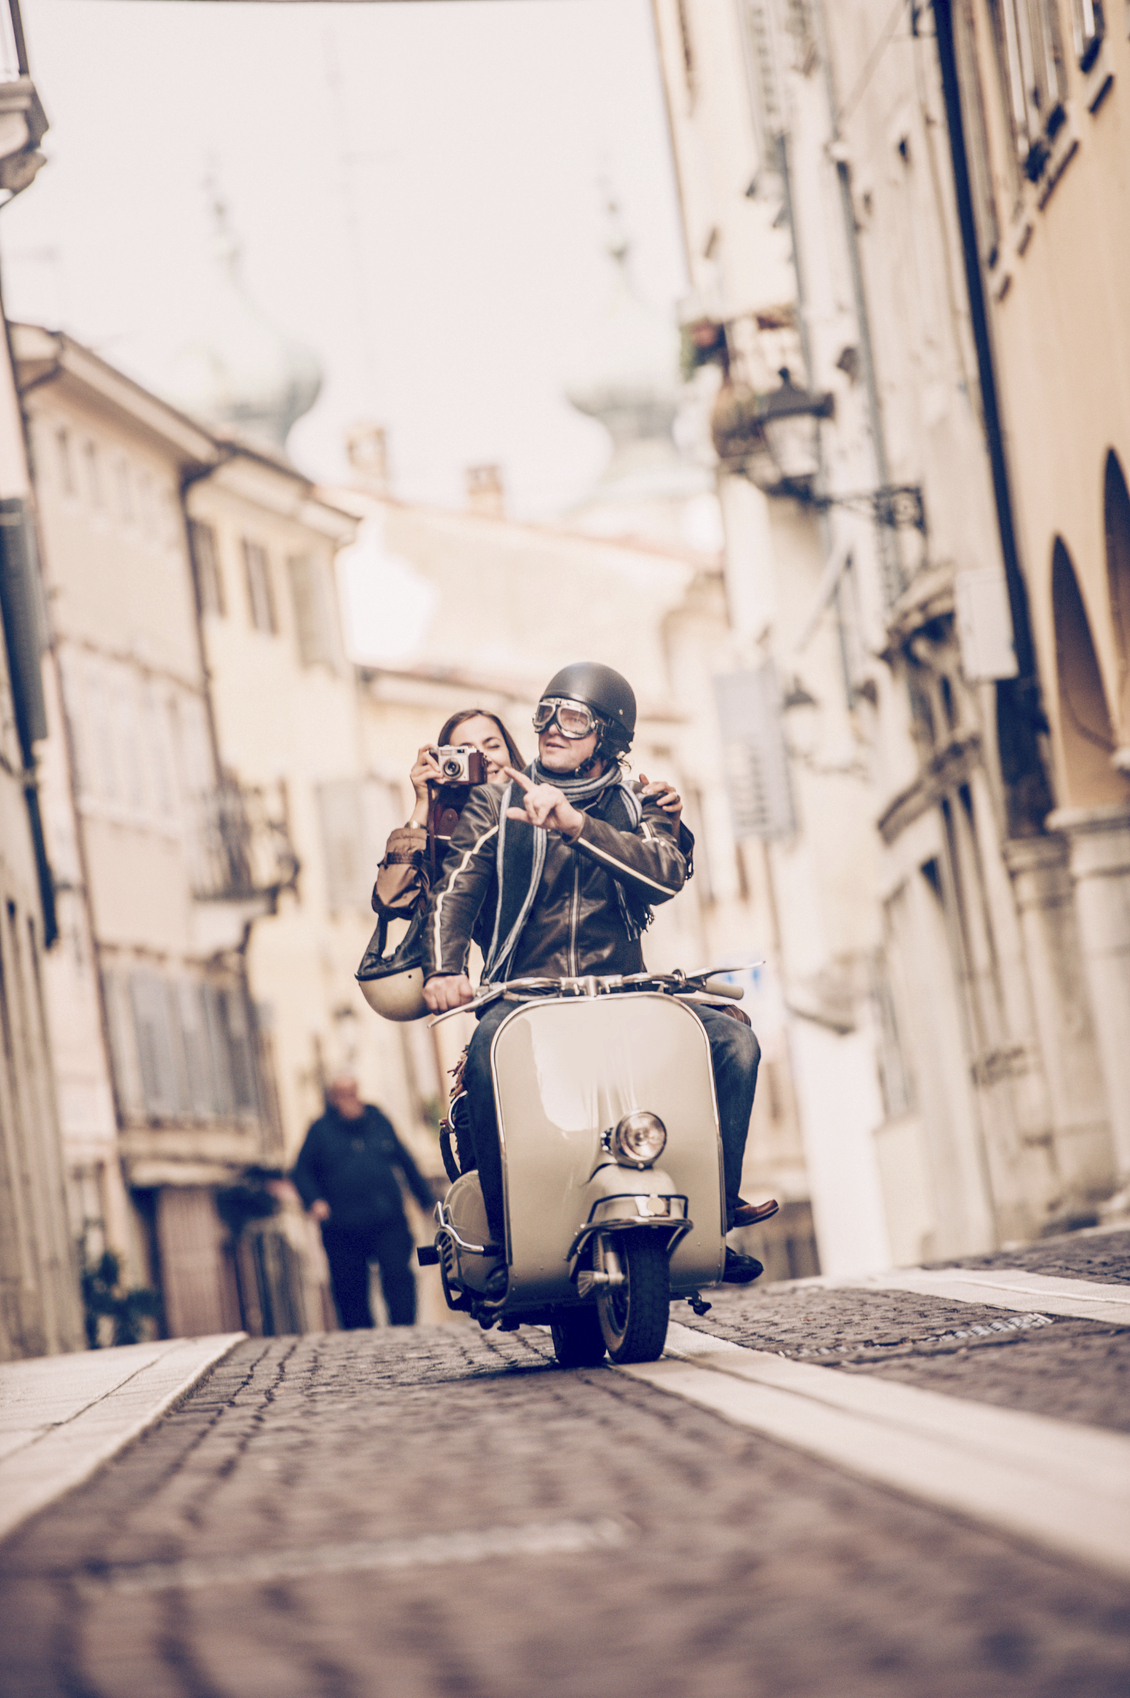 Vintage couple riding Vespa scooter in Italy, woman taking photos, front view